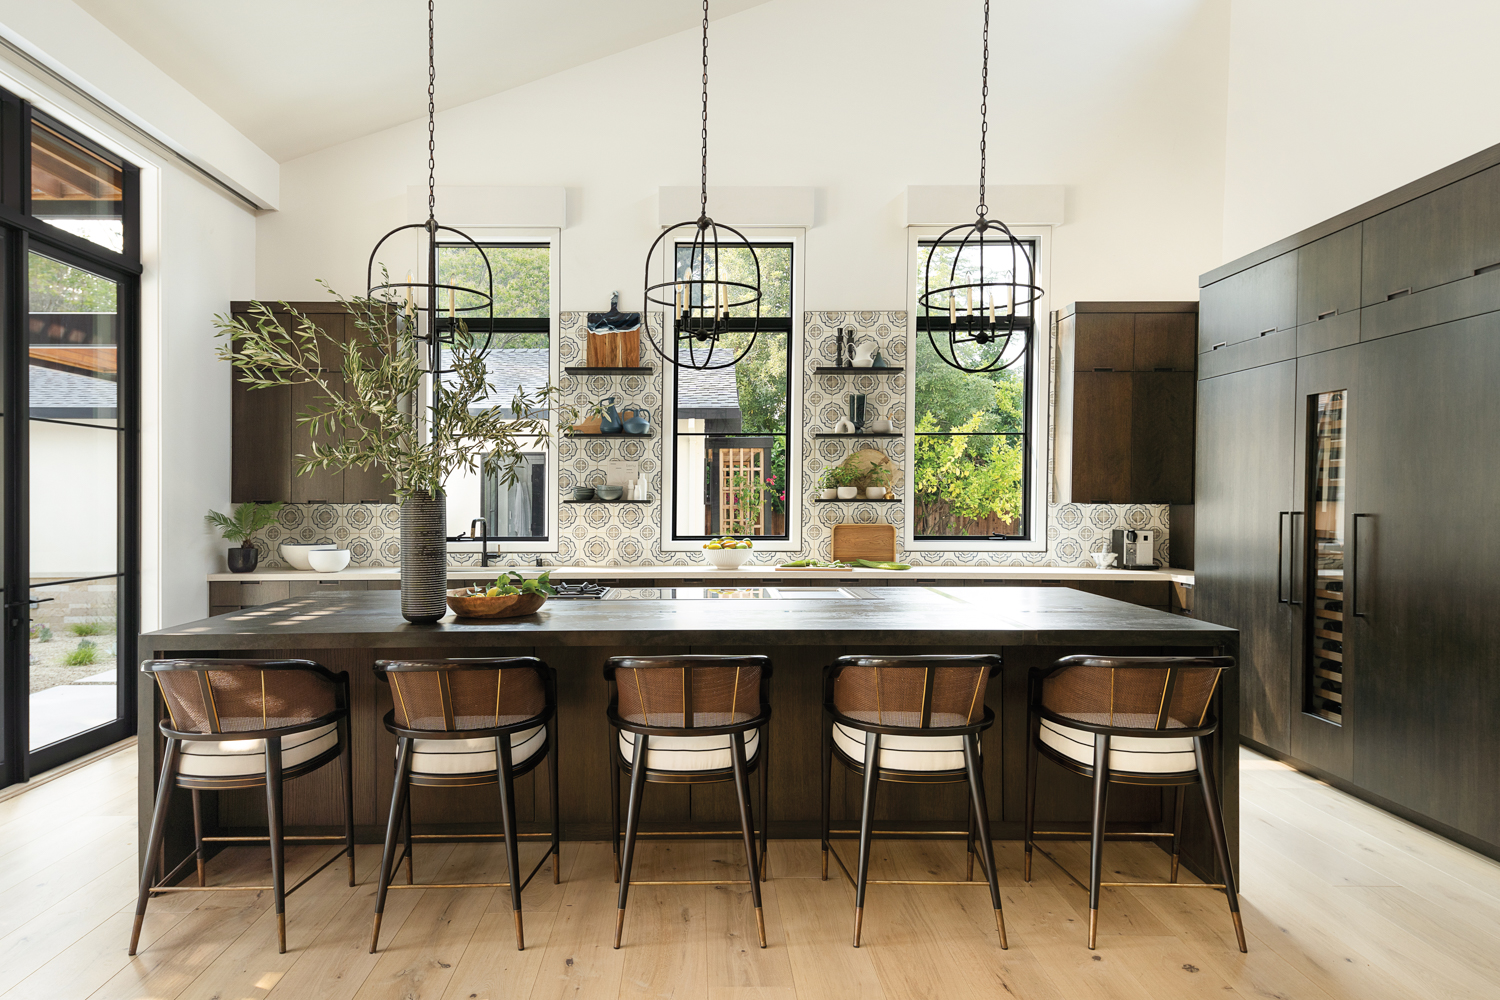 contemporary spanish-inspired kitchen with tile and sculptural pendants